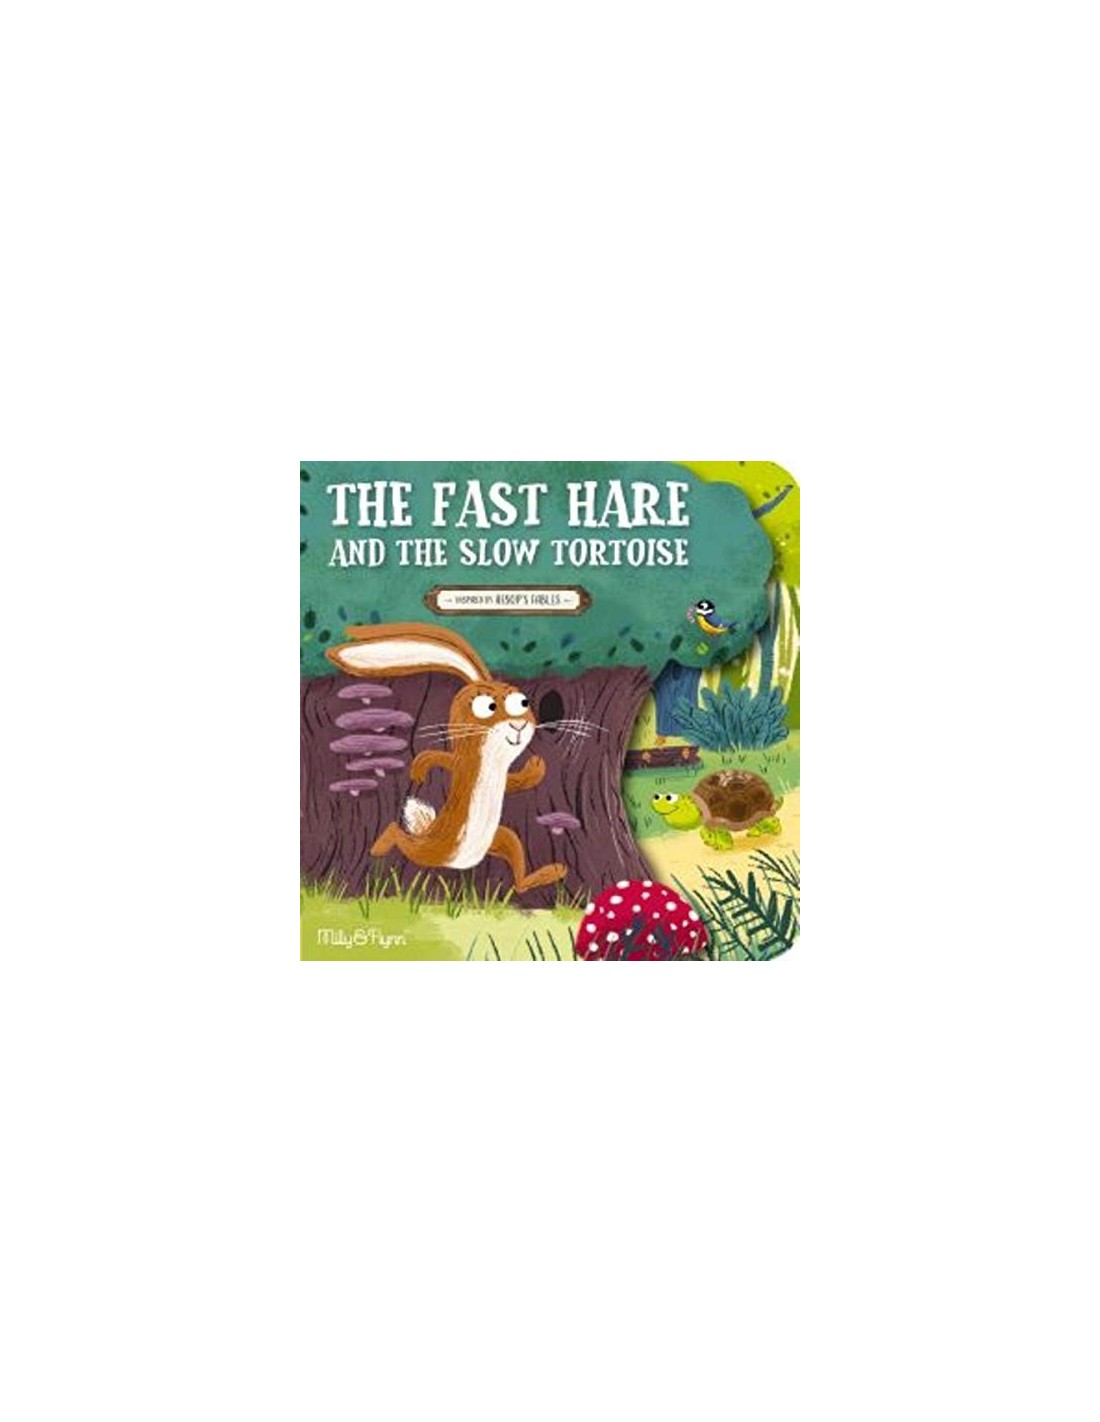 The Fast Hare and the Slow Tortoise